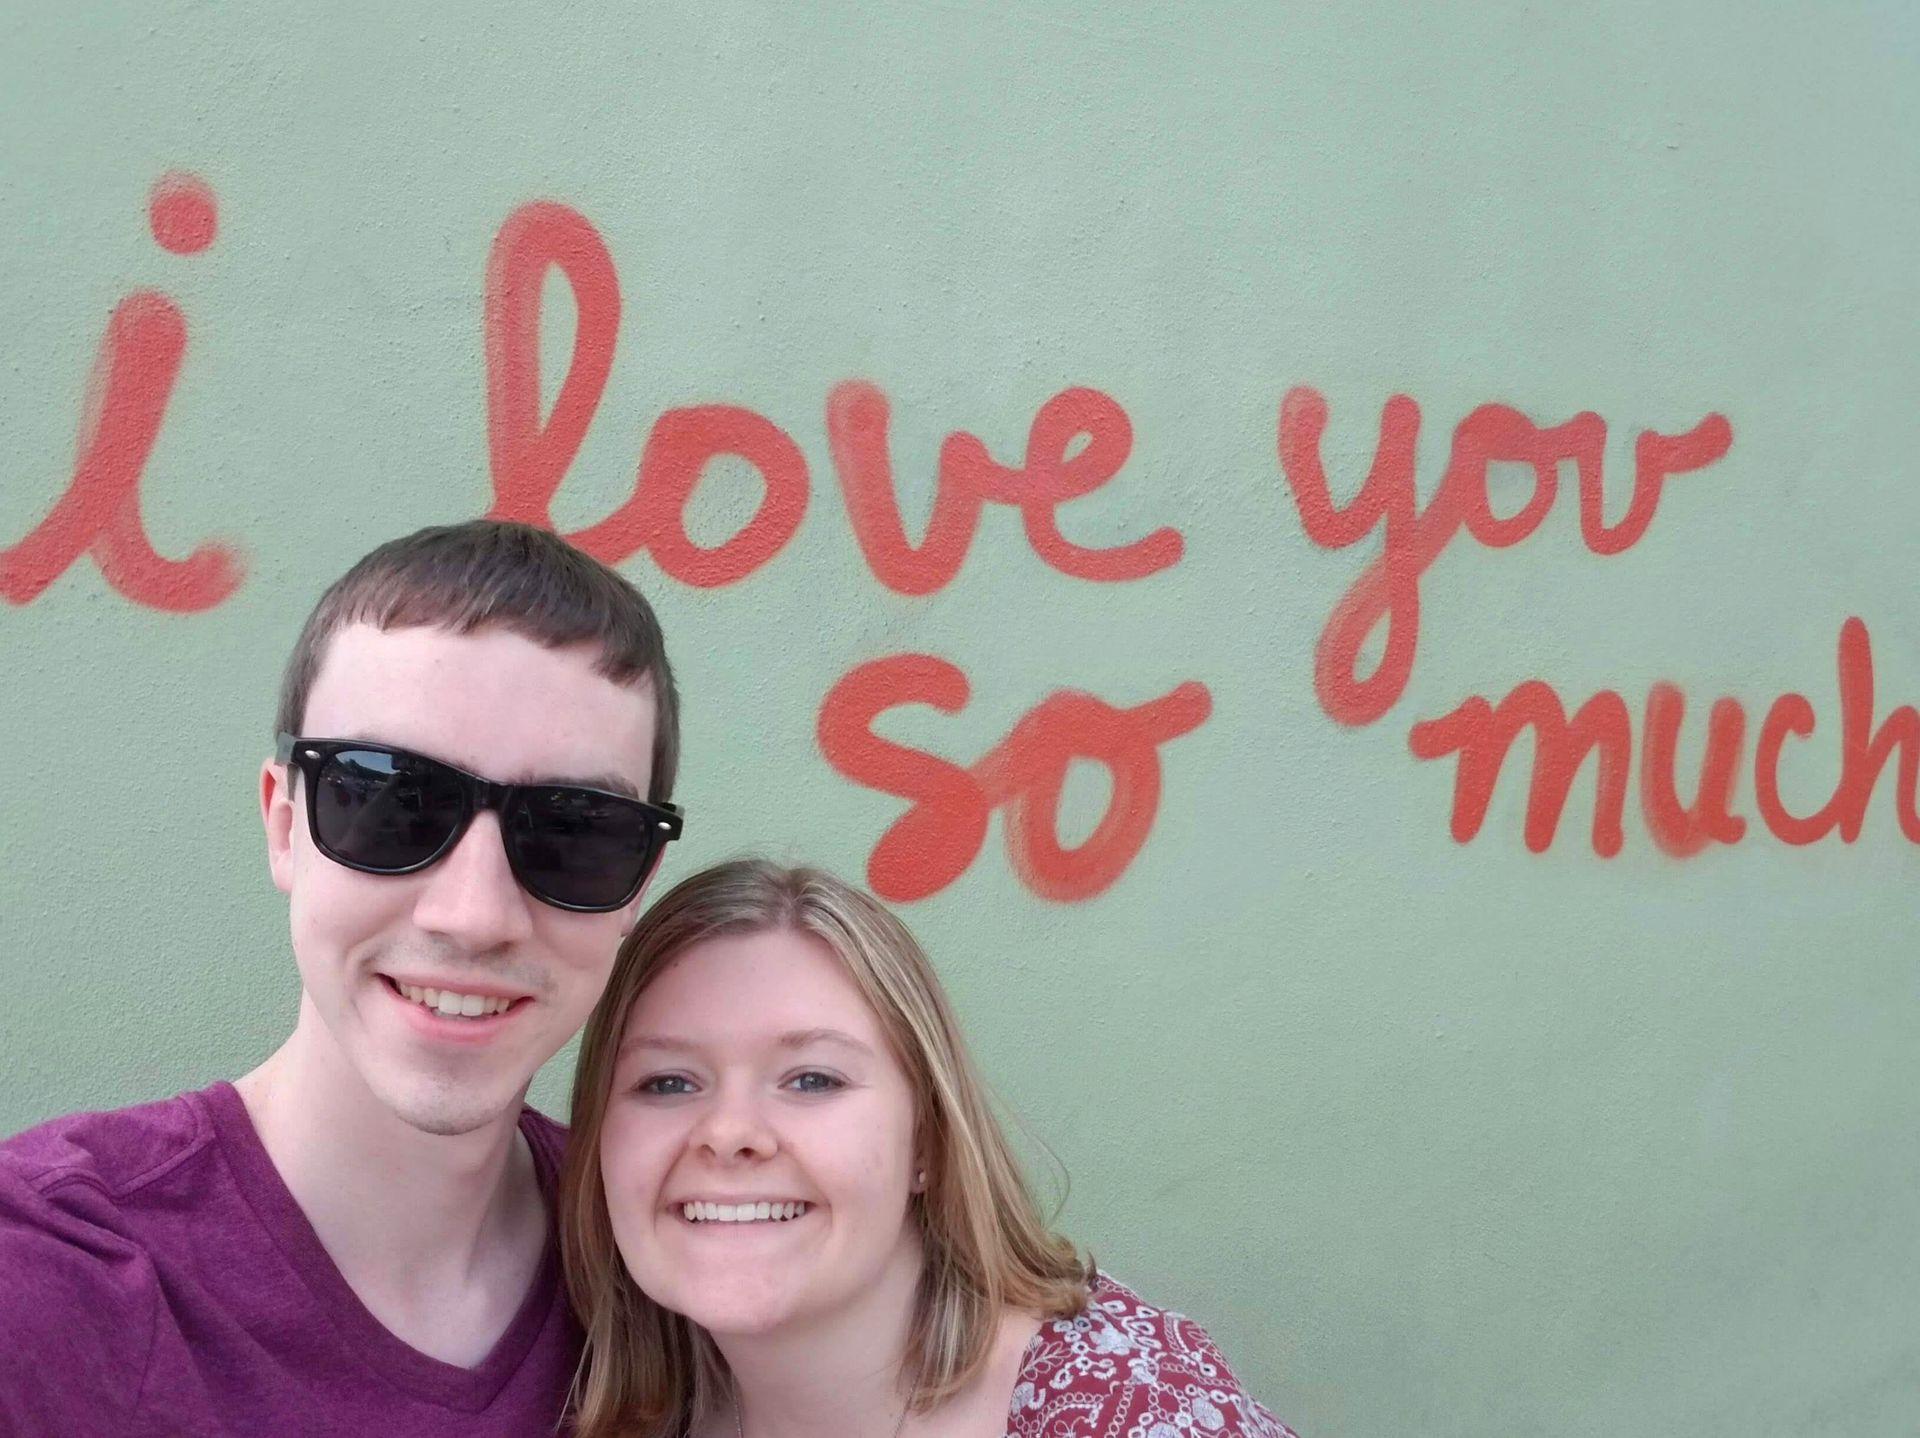 Lydia and Joe in front of the "I Love you So Much" mural in SoCo, Austin.